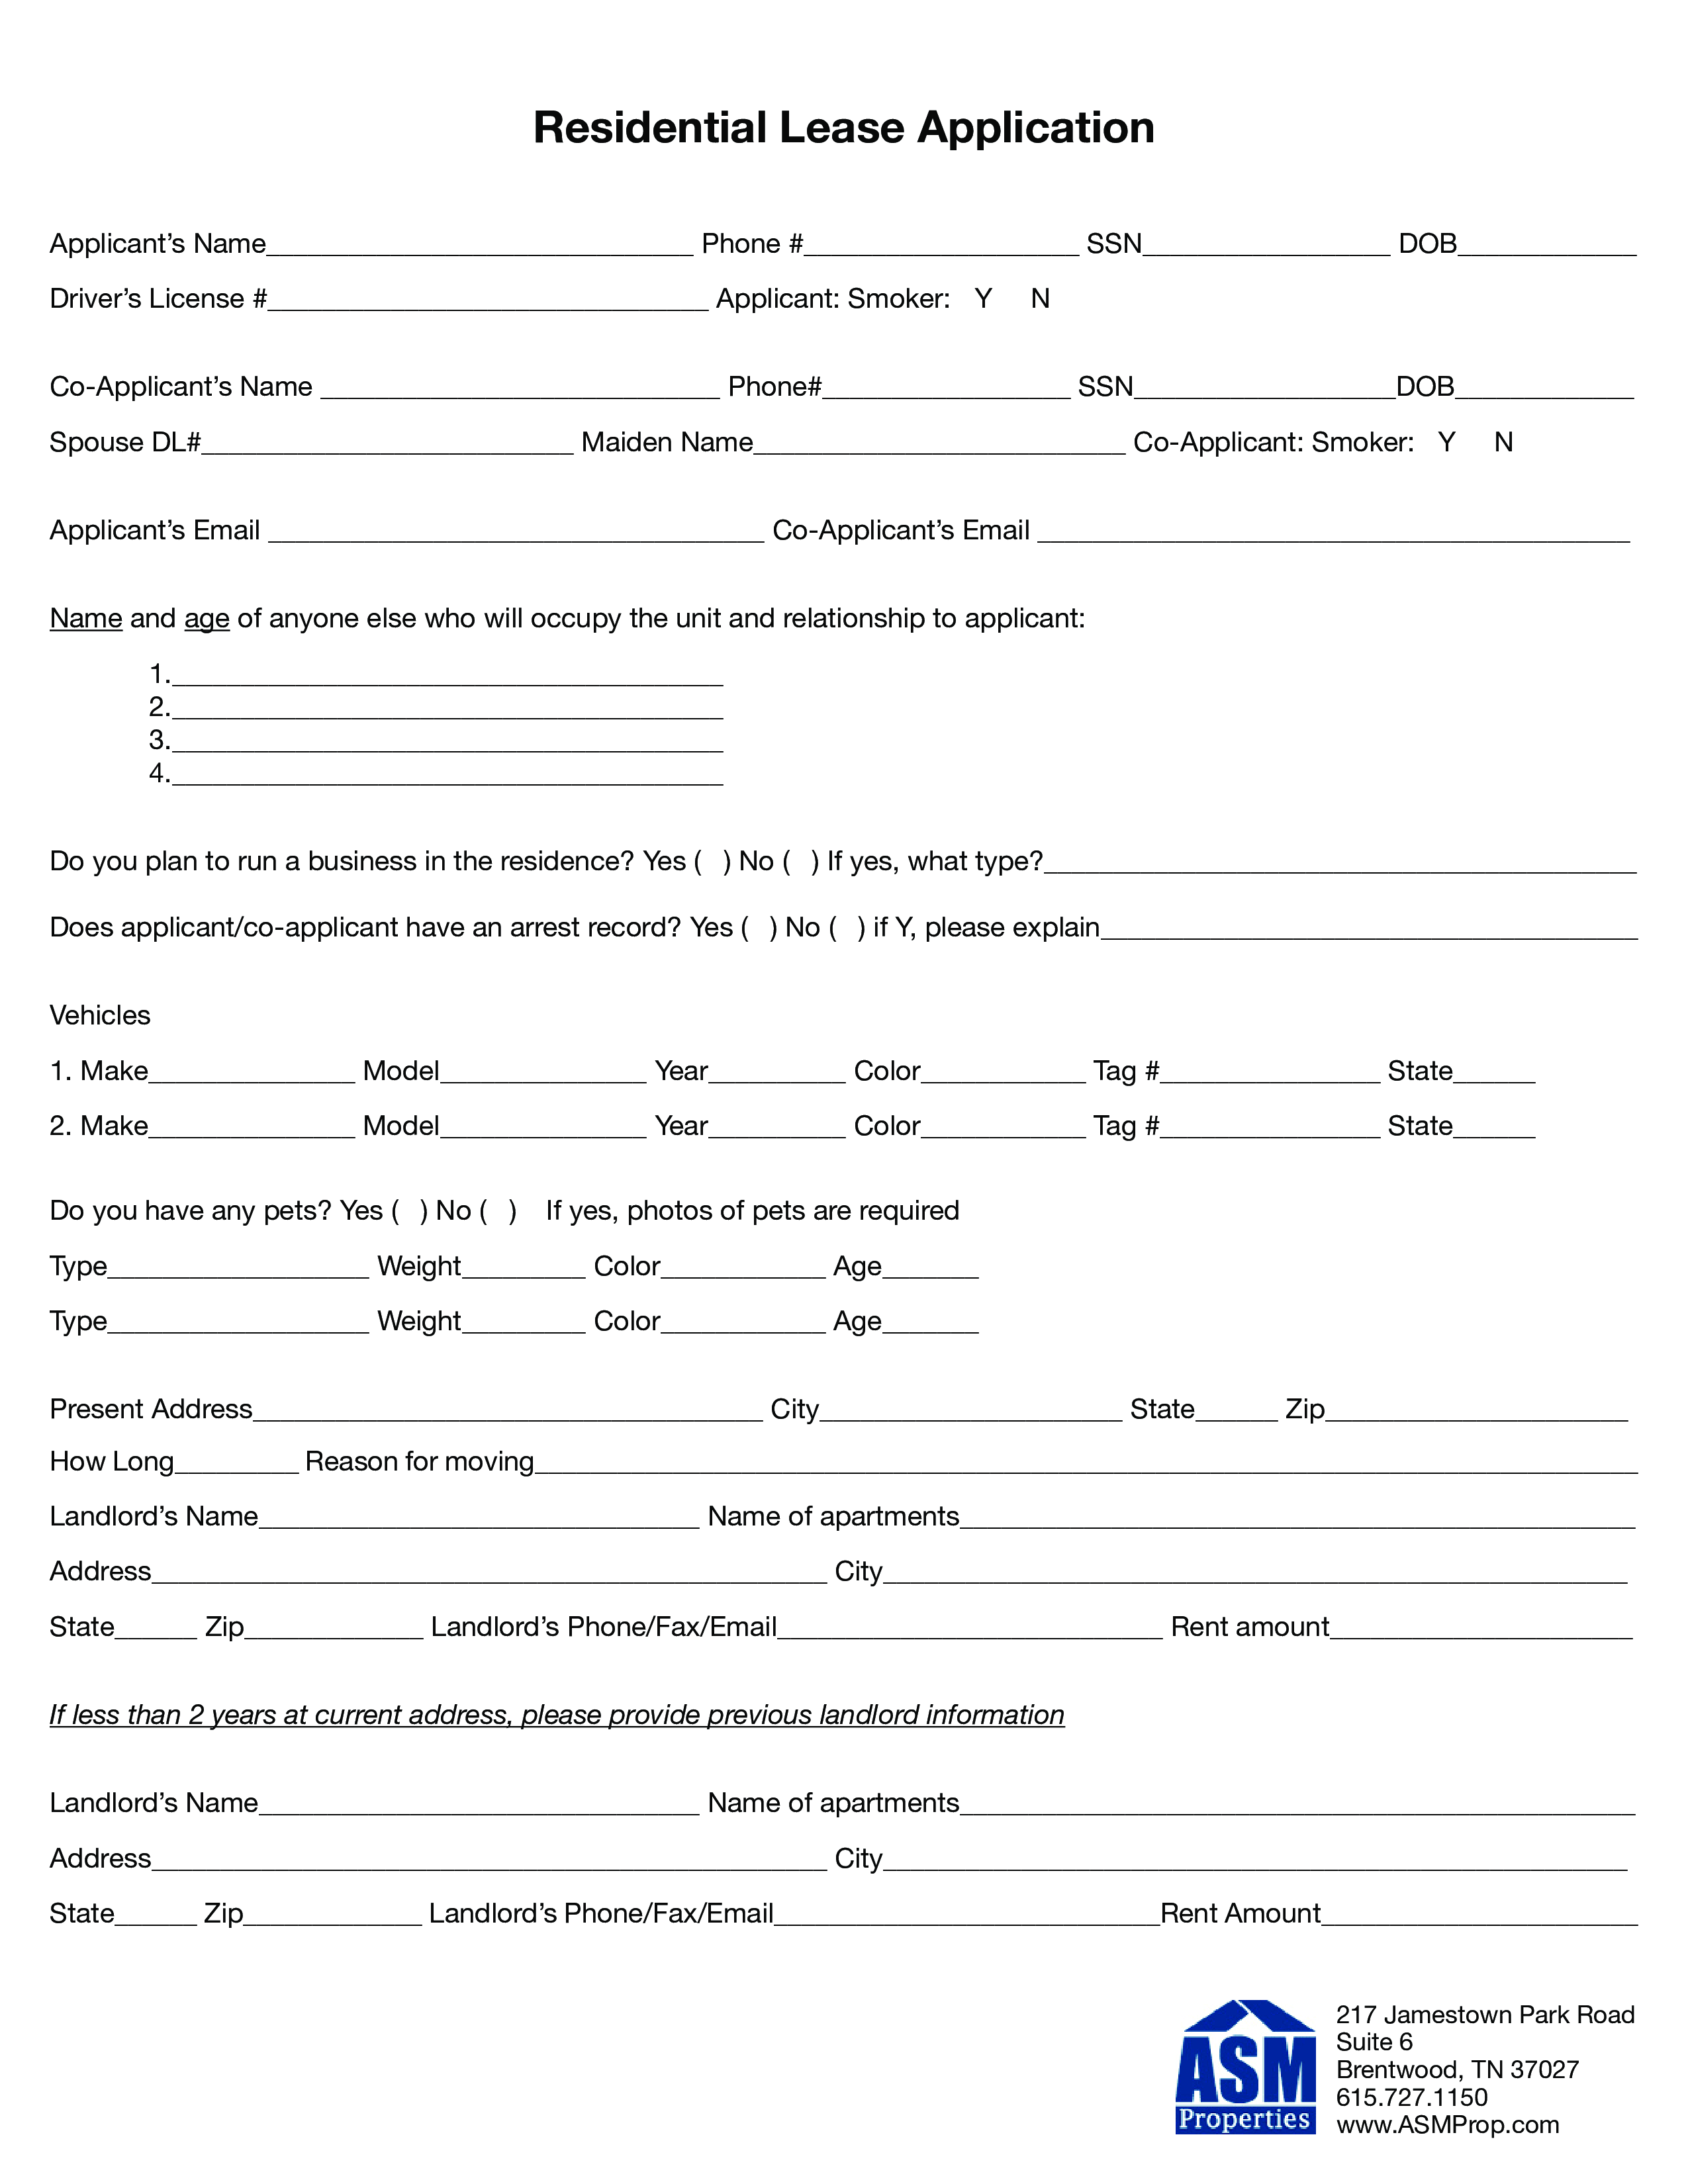 residential lease application form example modèles